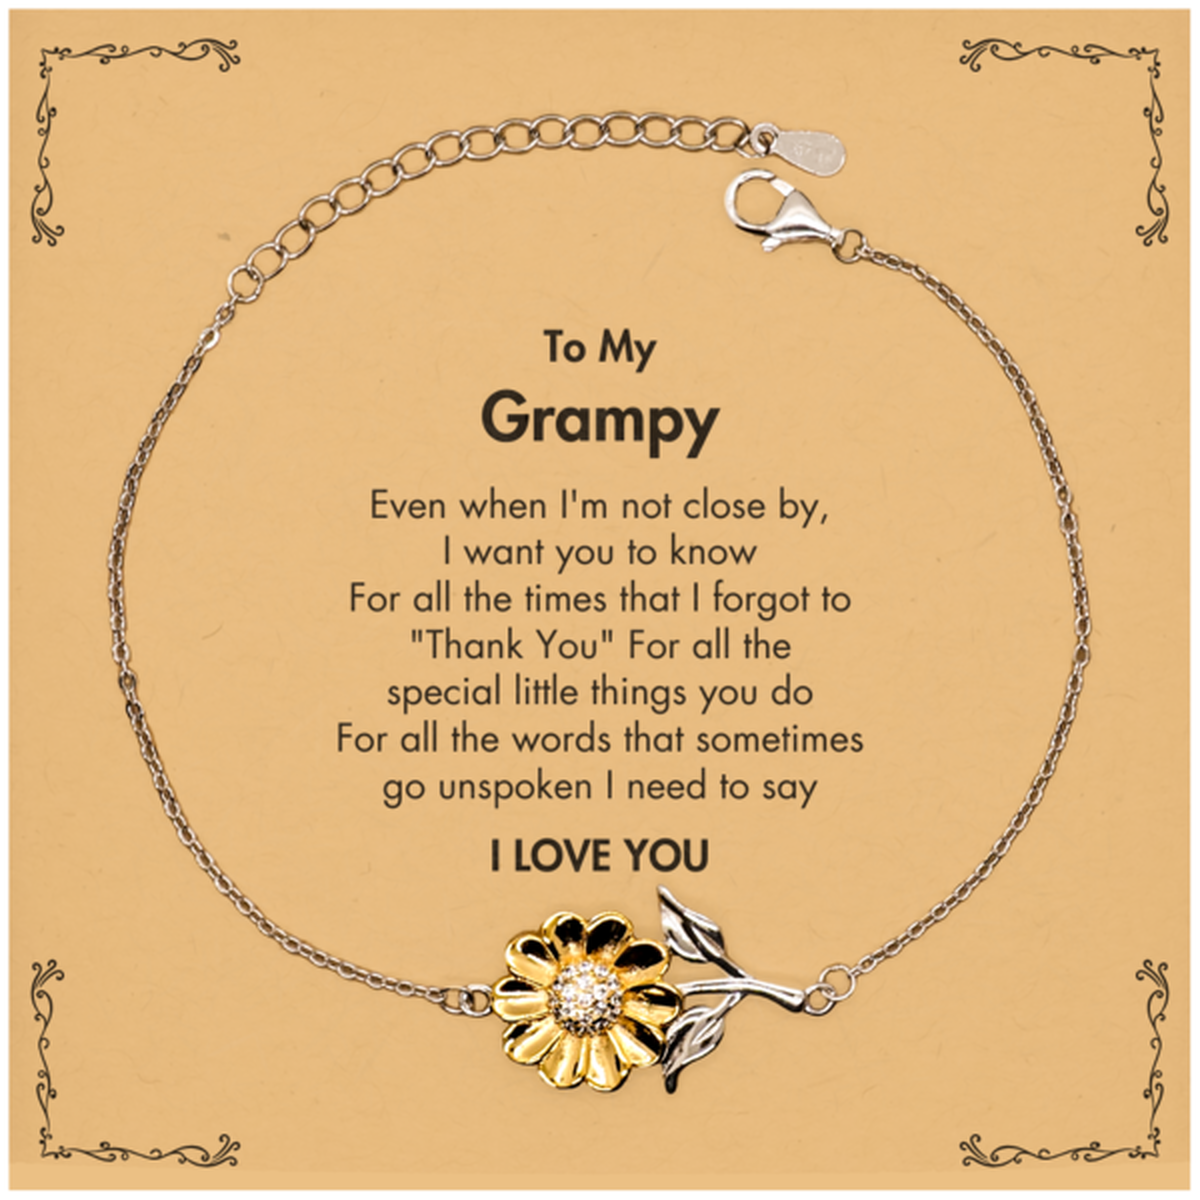 Thank You Gifts for Grampy, Keepsake Sunflower Bracelet Gifts for Grampy Birthday Mother's day Father's Day Grampy For all the words That sometimes go unspoken I need to say I LOVE YOU